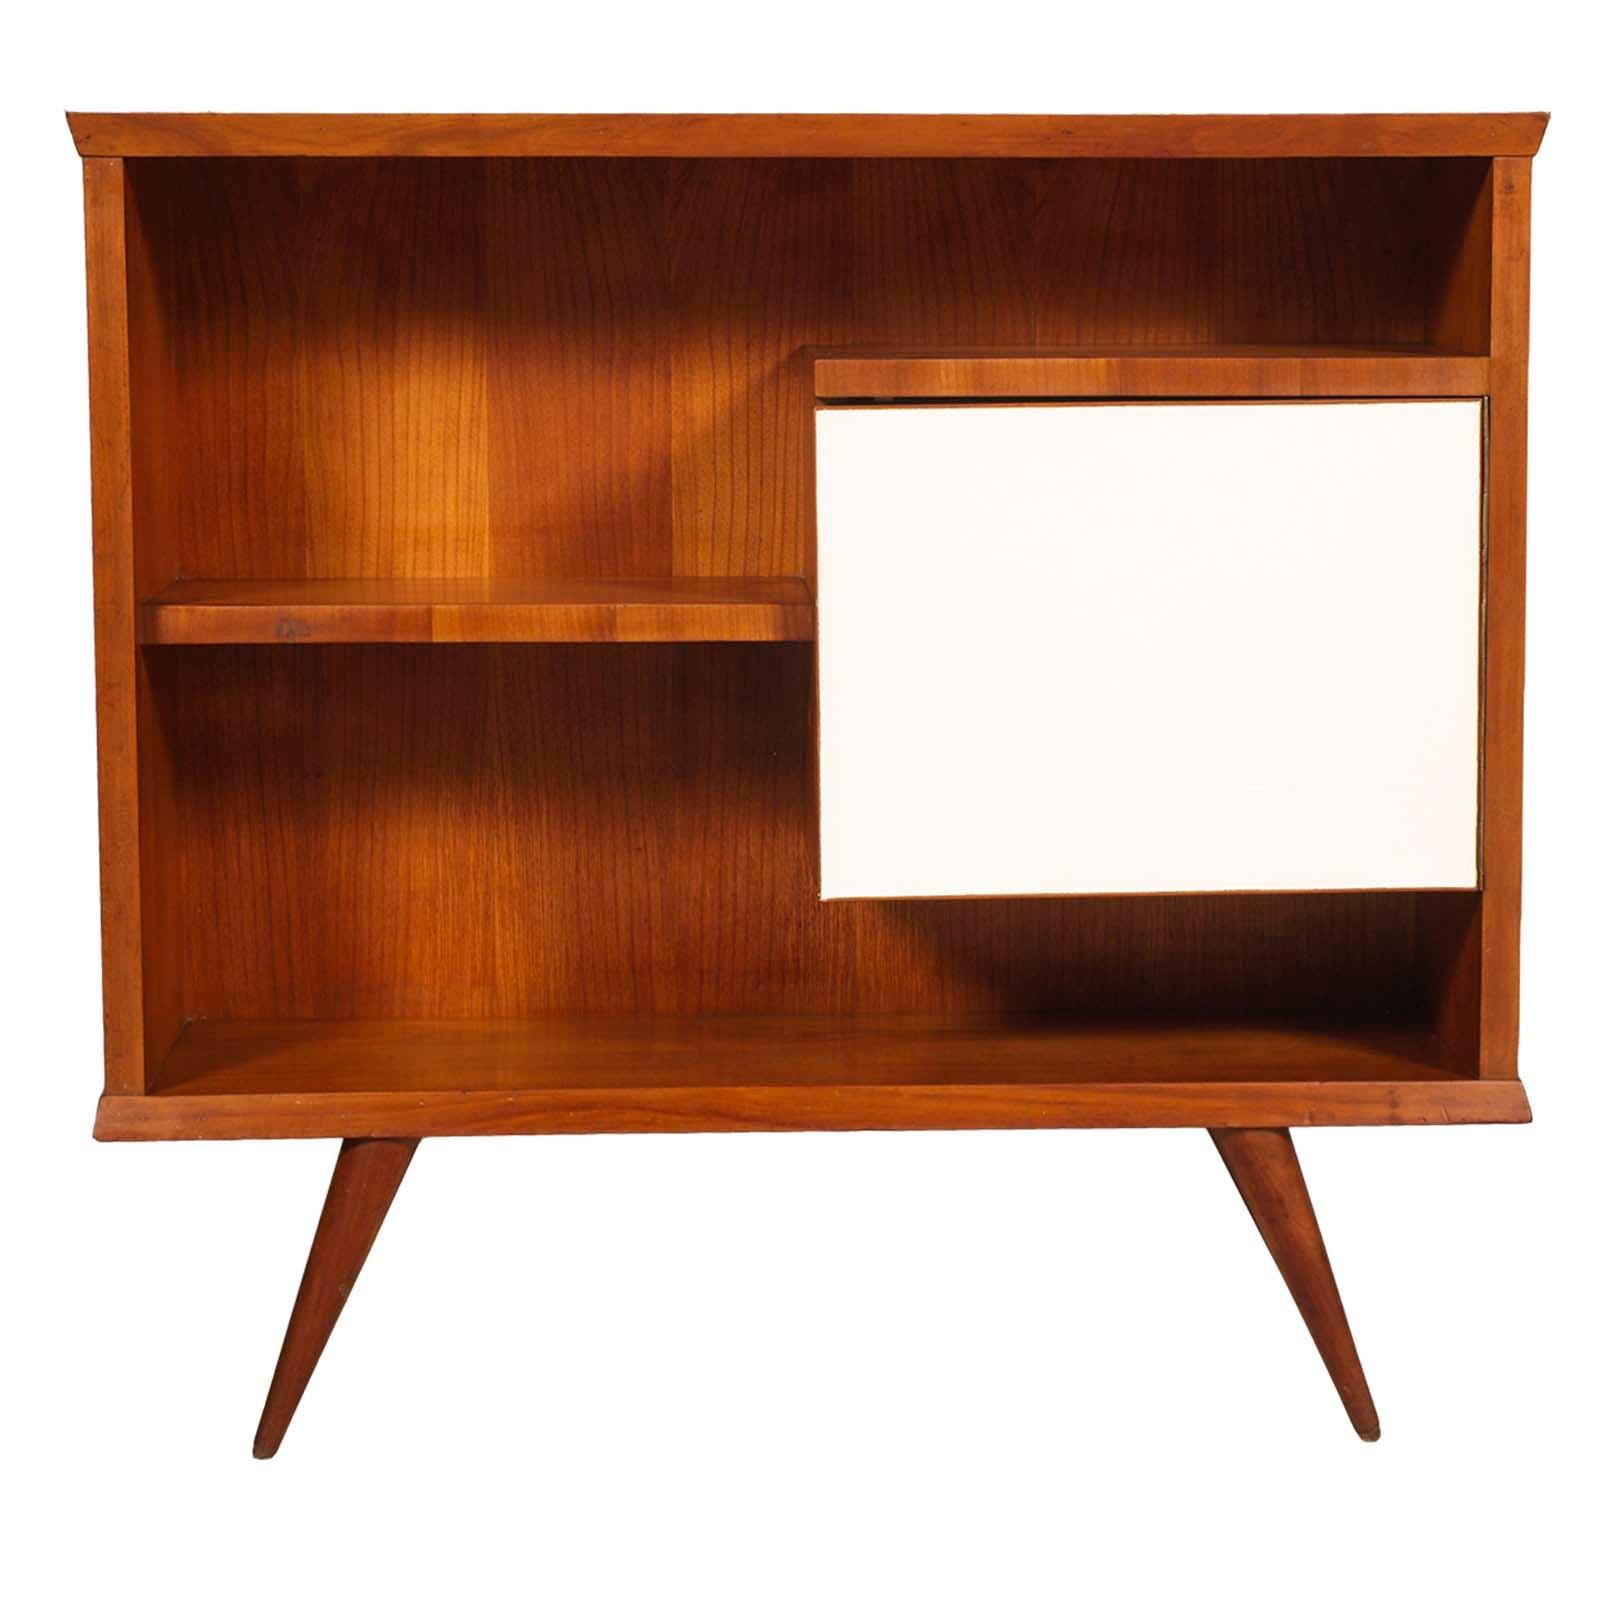 Small bookcase, cabinet, Ico Parisi attributable, in veneered teack, labelled La Permanente Mobili Cantù, with top and cream white painted door, restored and wax polished, circa 1940s.